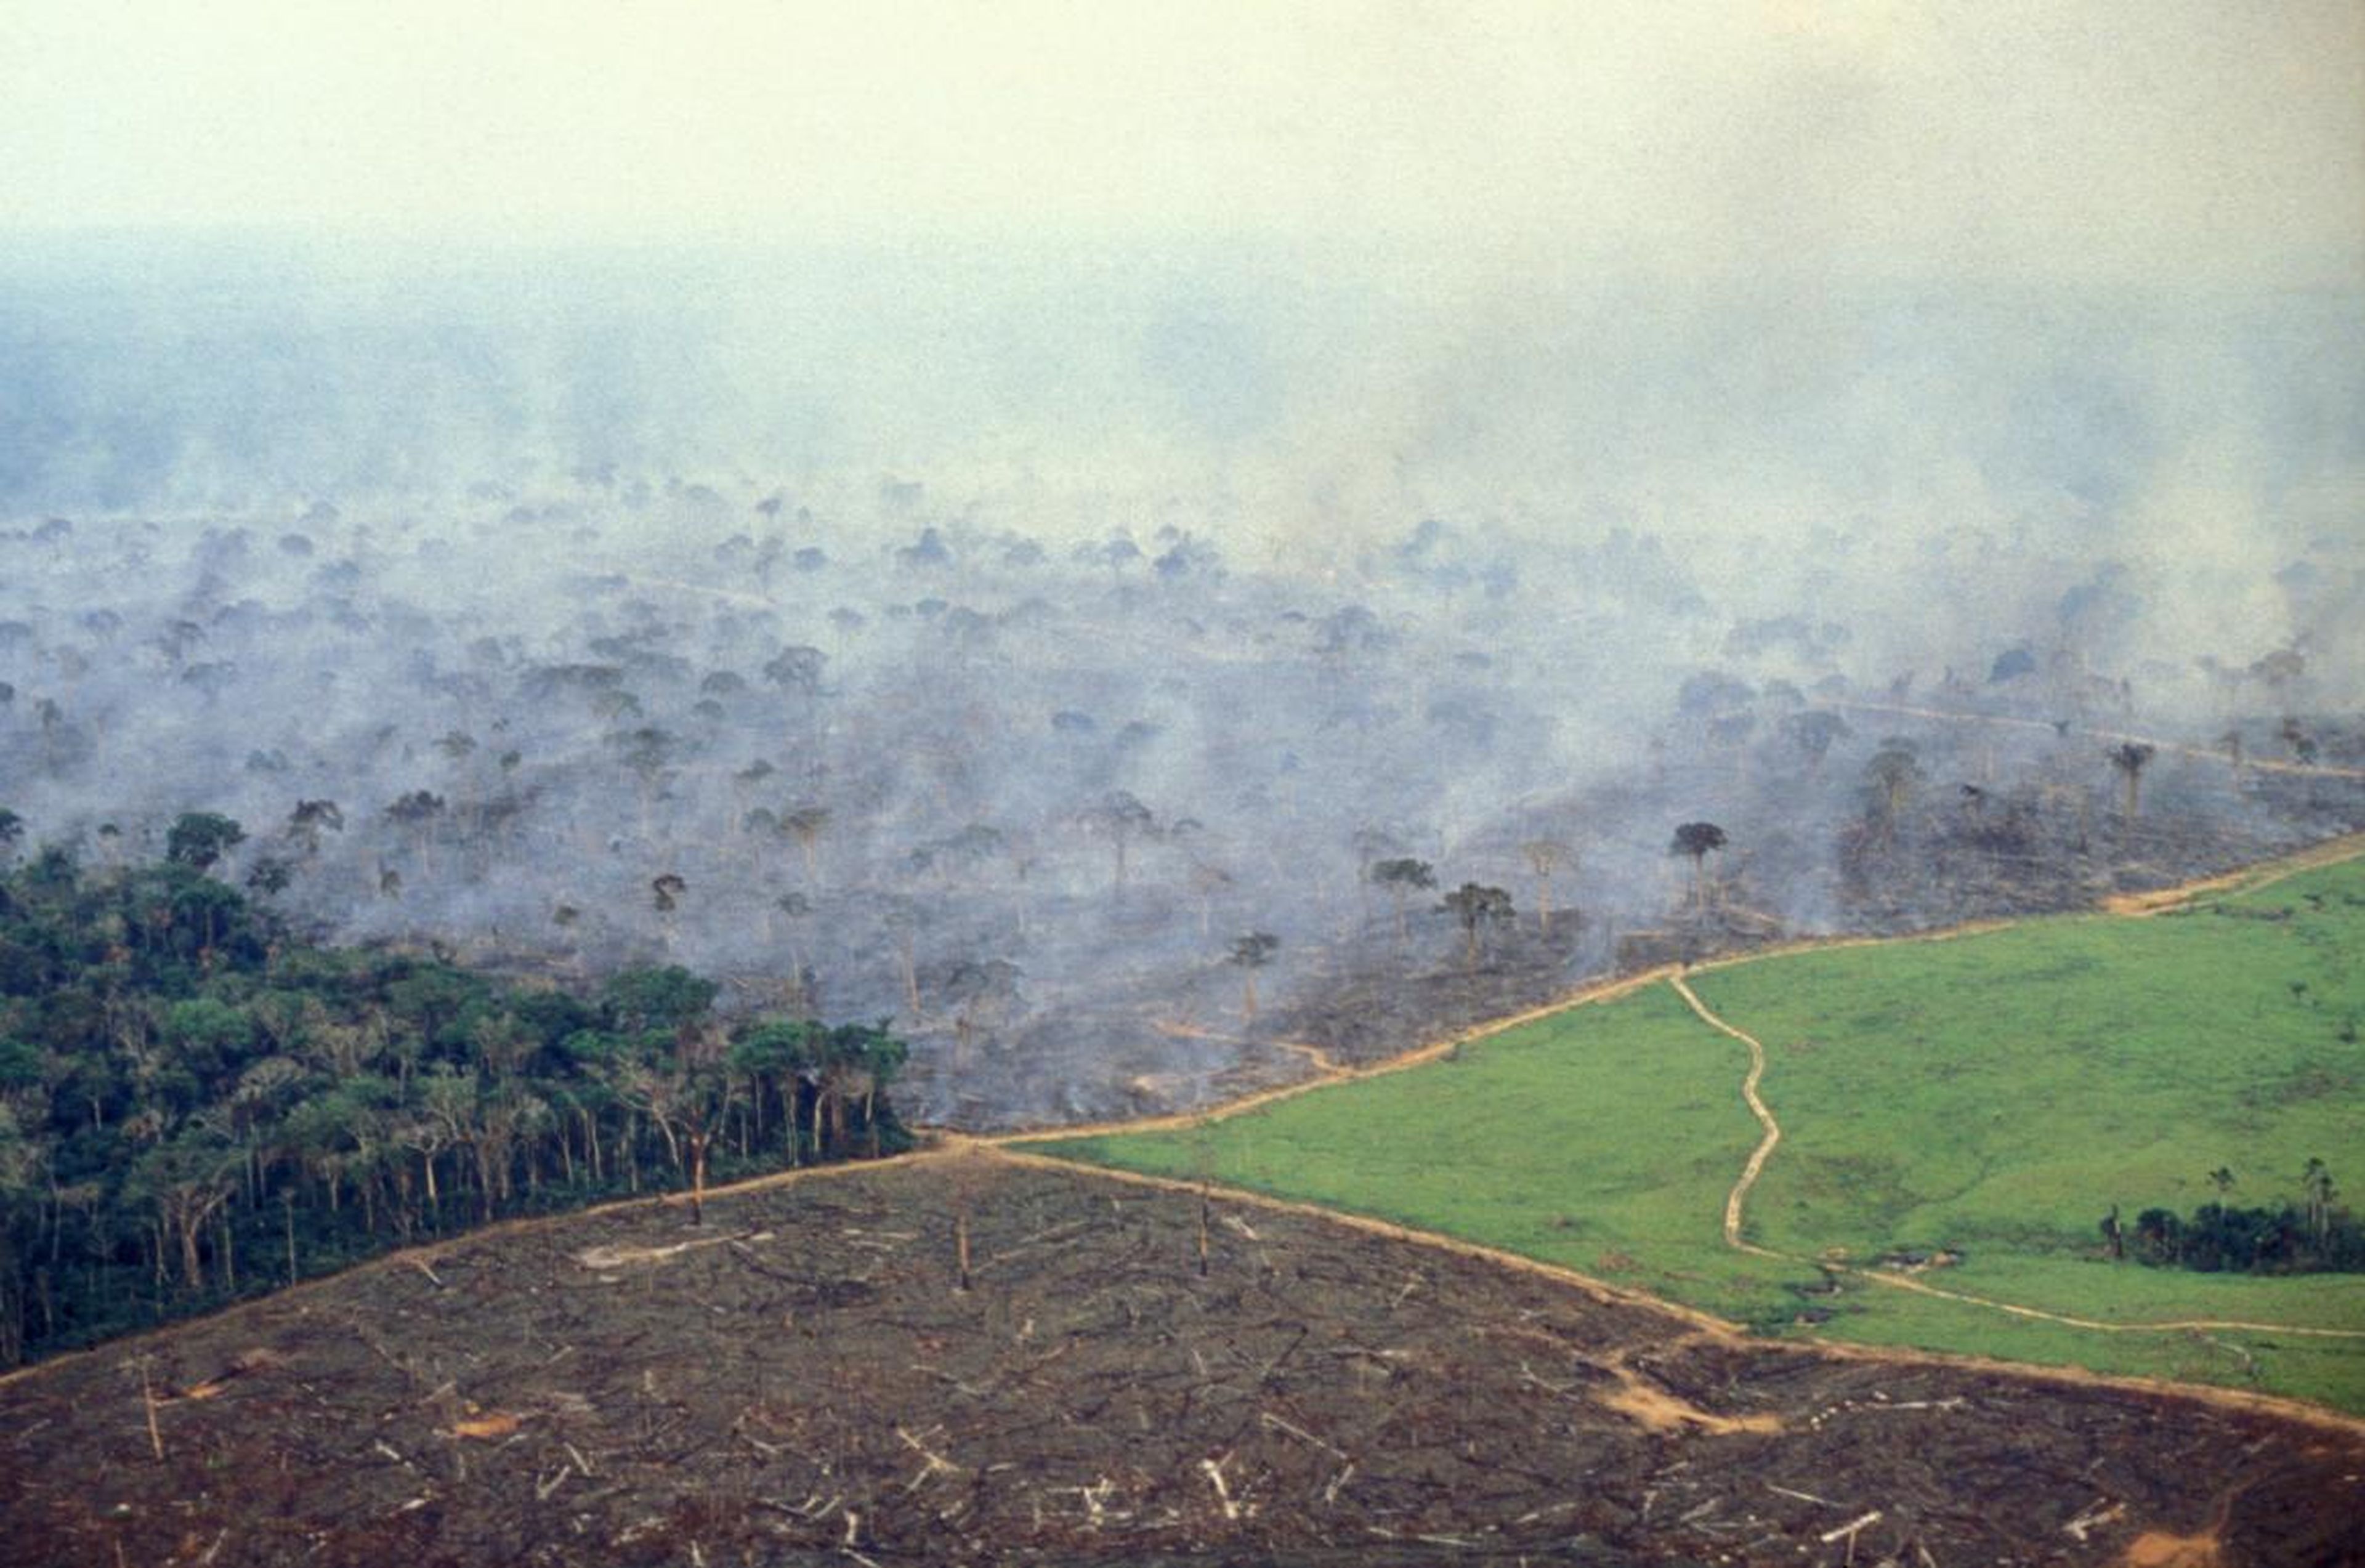 This November 17, 2014 photo shows the four stages of land management on a big cattle farm in the Brazilian Amazon: cleared land that was recently burned, a grassy pasture waiting for cattle, burning forest, and native forest that will eventually meet the